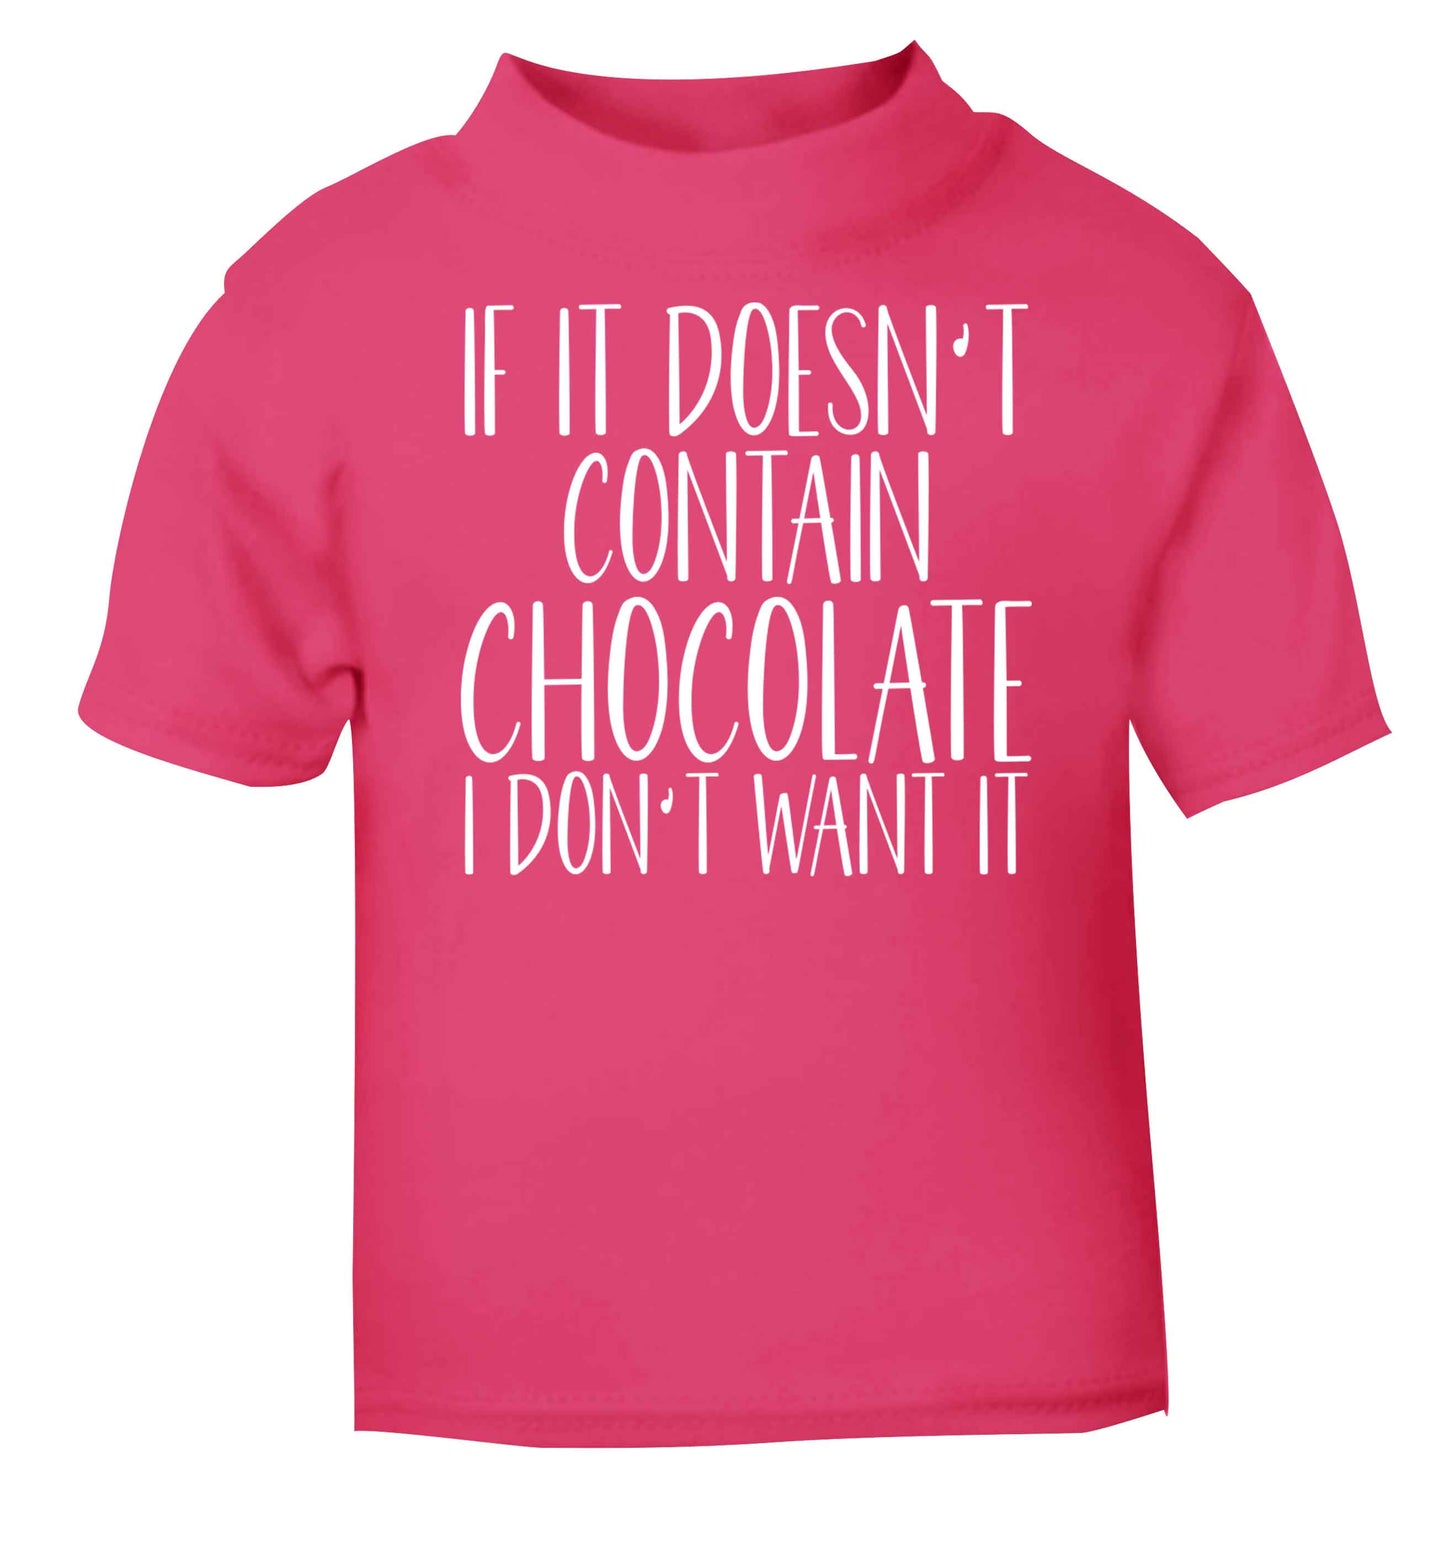 If it doesn't contain chocolate I don't want it pink baby toddler Tshirt 2 Years